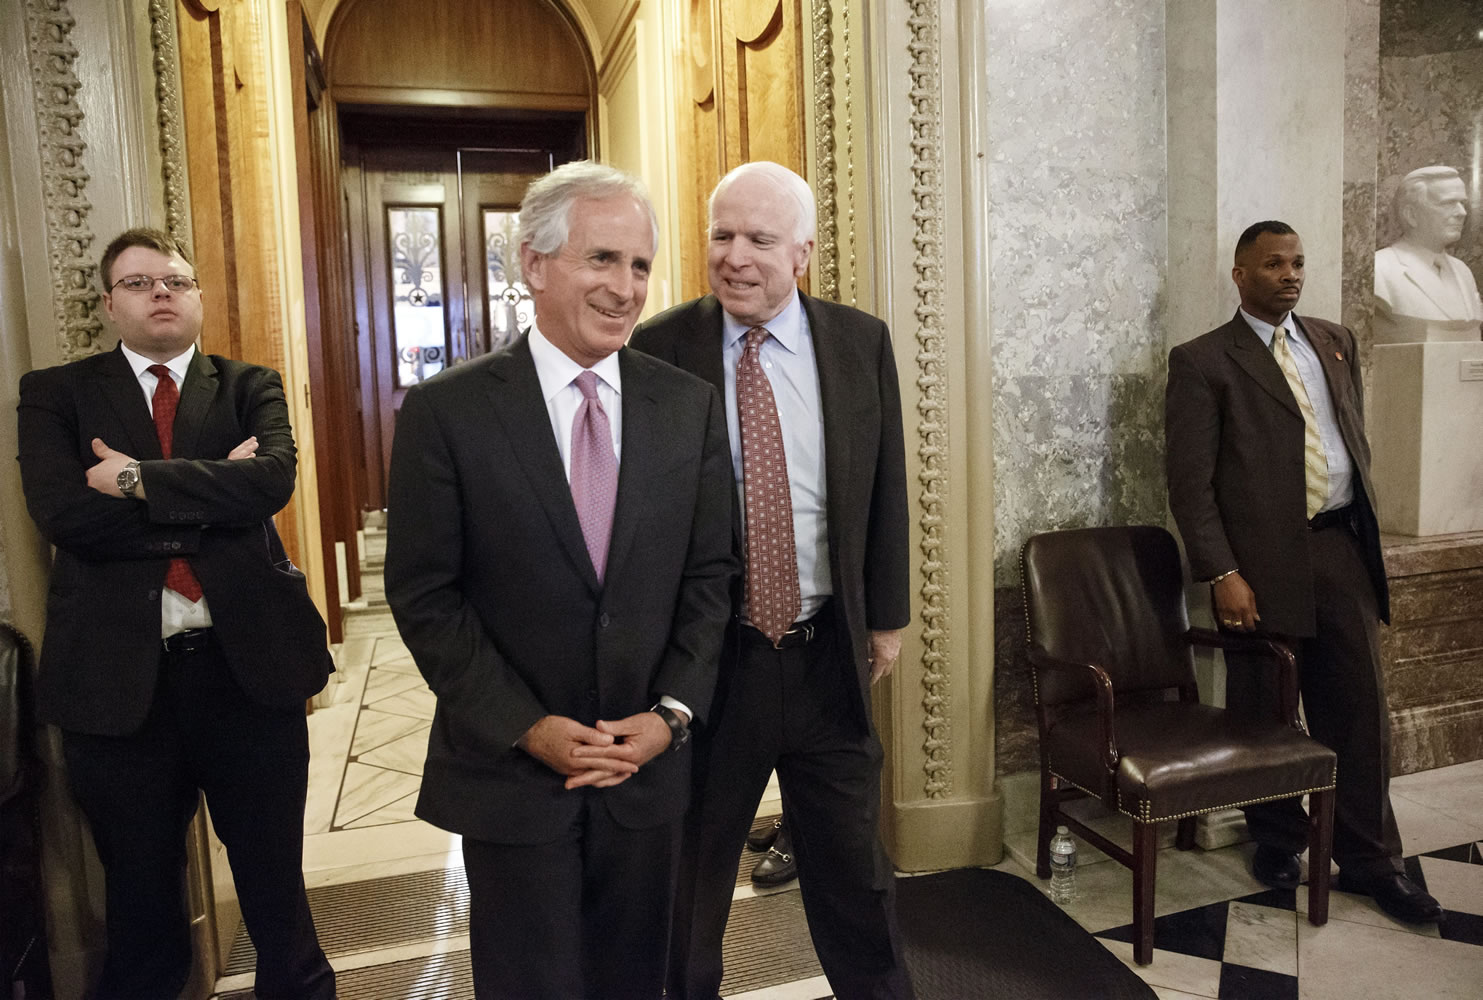 Sen. Bob Corker, R-Tenn., left, and Sen. John McCain, R-Ariz., join other lawmakers Monday during the vote on restoring jobless benefits for the long-term unemployed, legislation that expired late last year, at the Capitol in Washington.